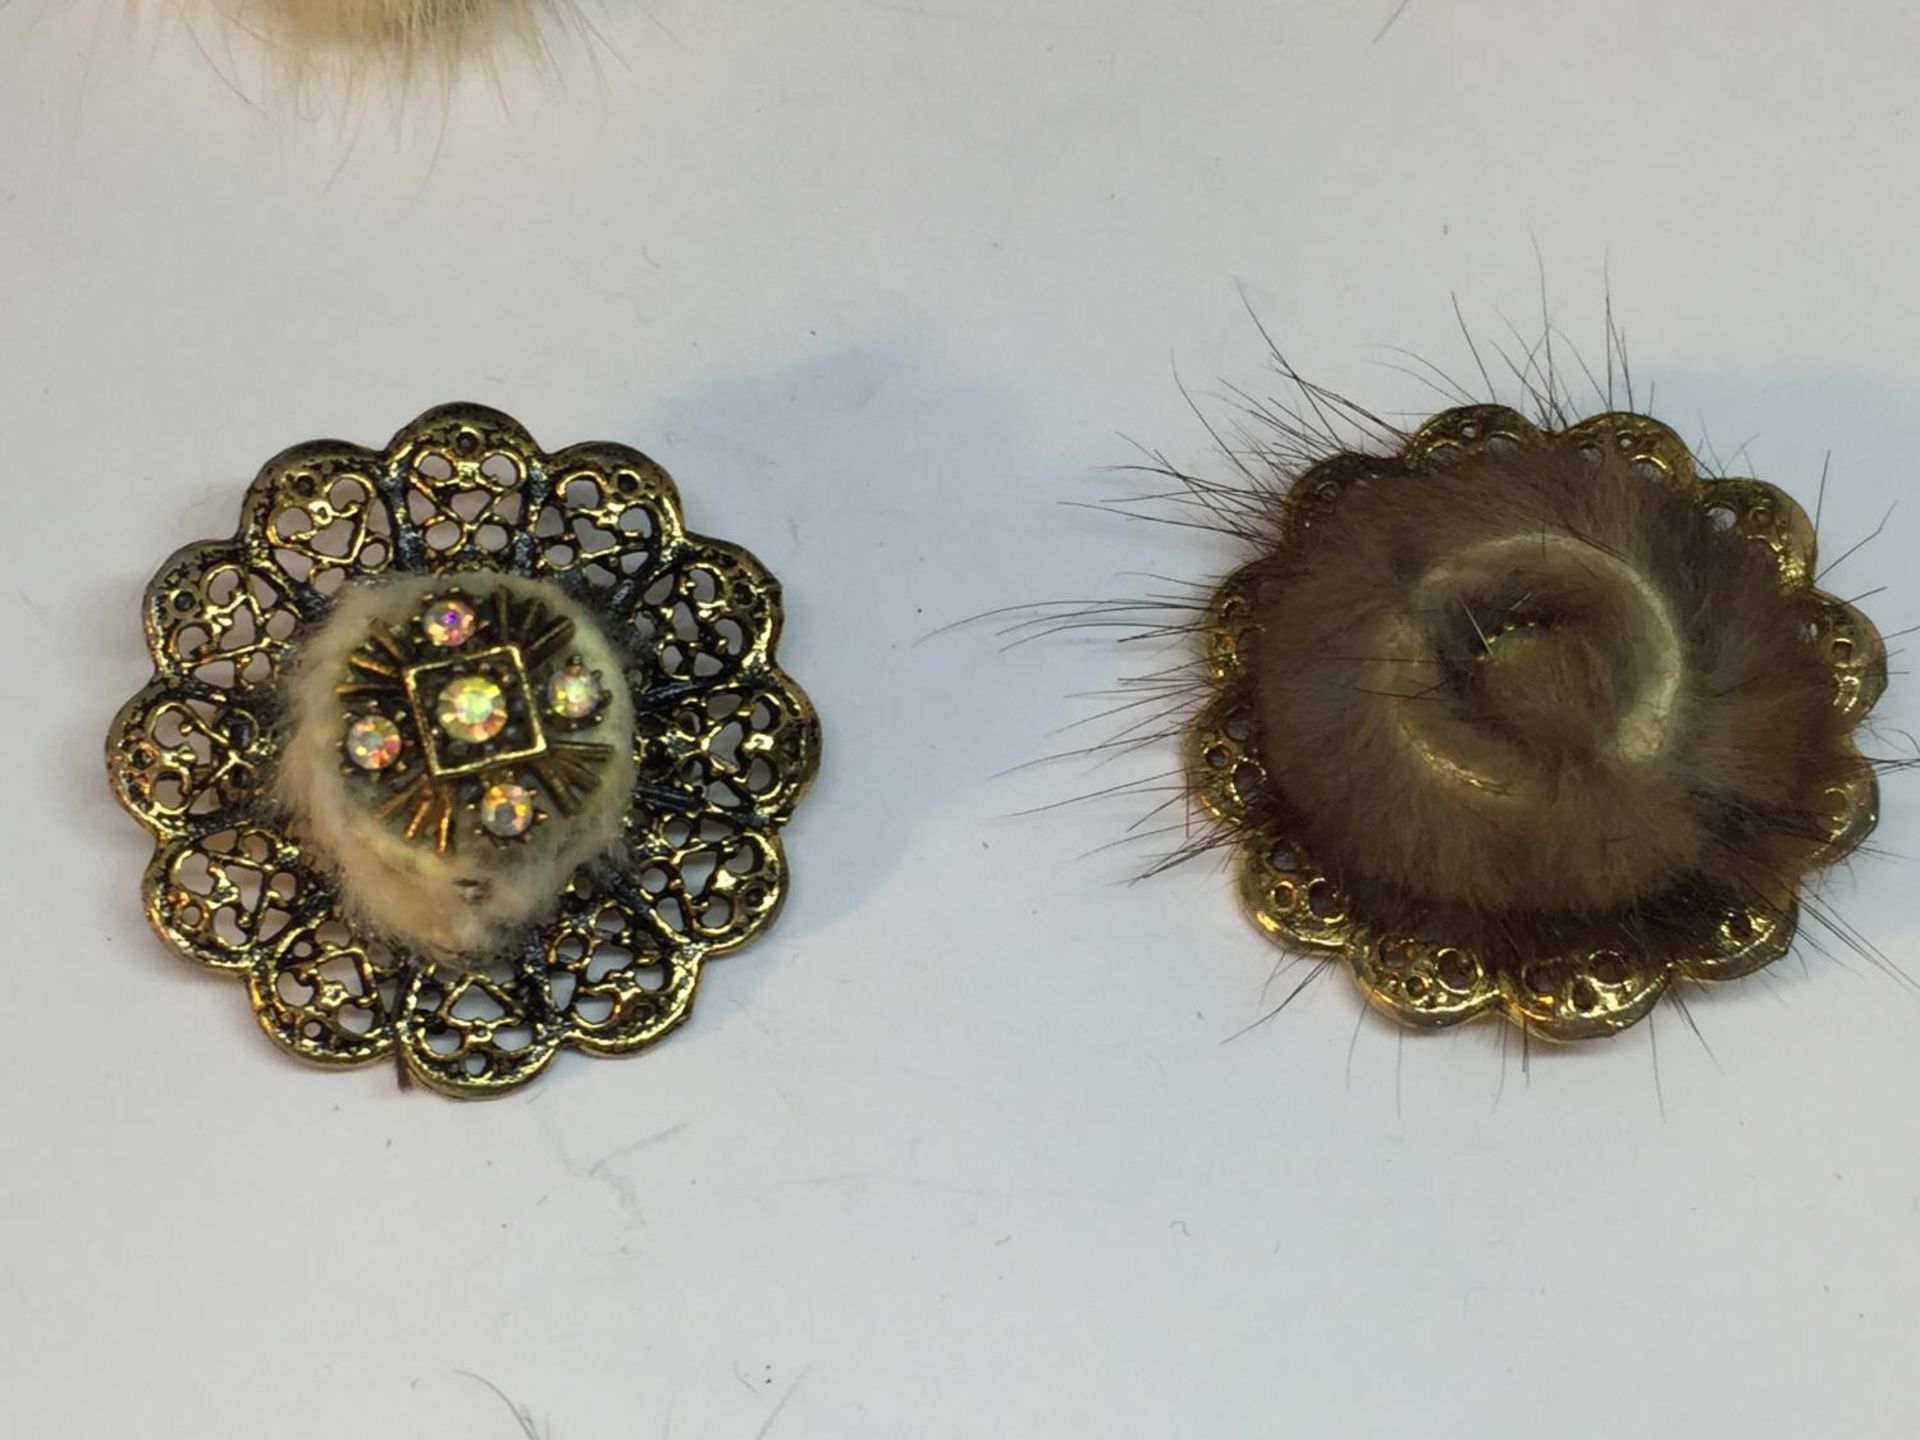 SIX 1950'S FUR BROACHES - Image 4 of 4